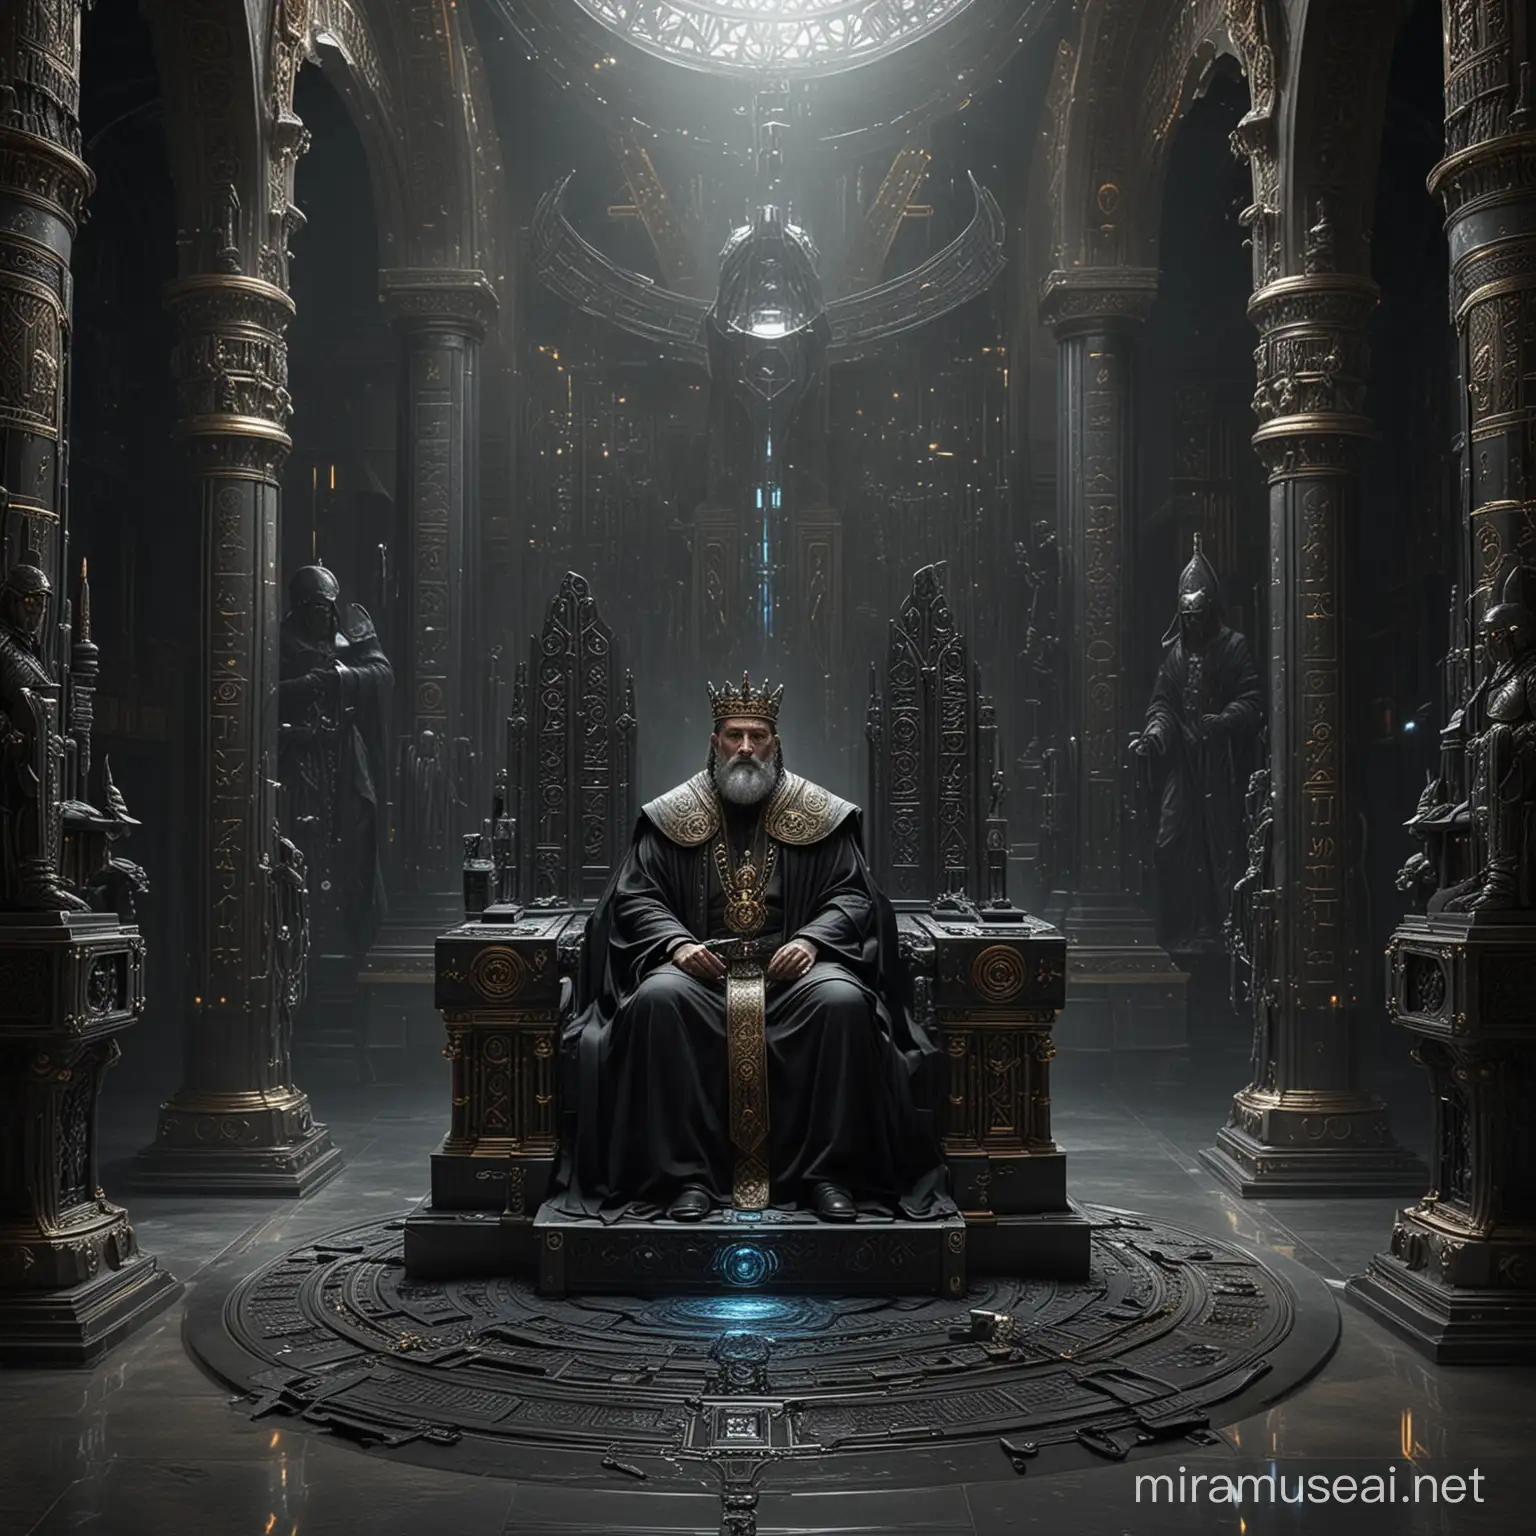 Futuristic Pharisee King on Obsidian Throne in Cyber Court